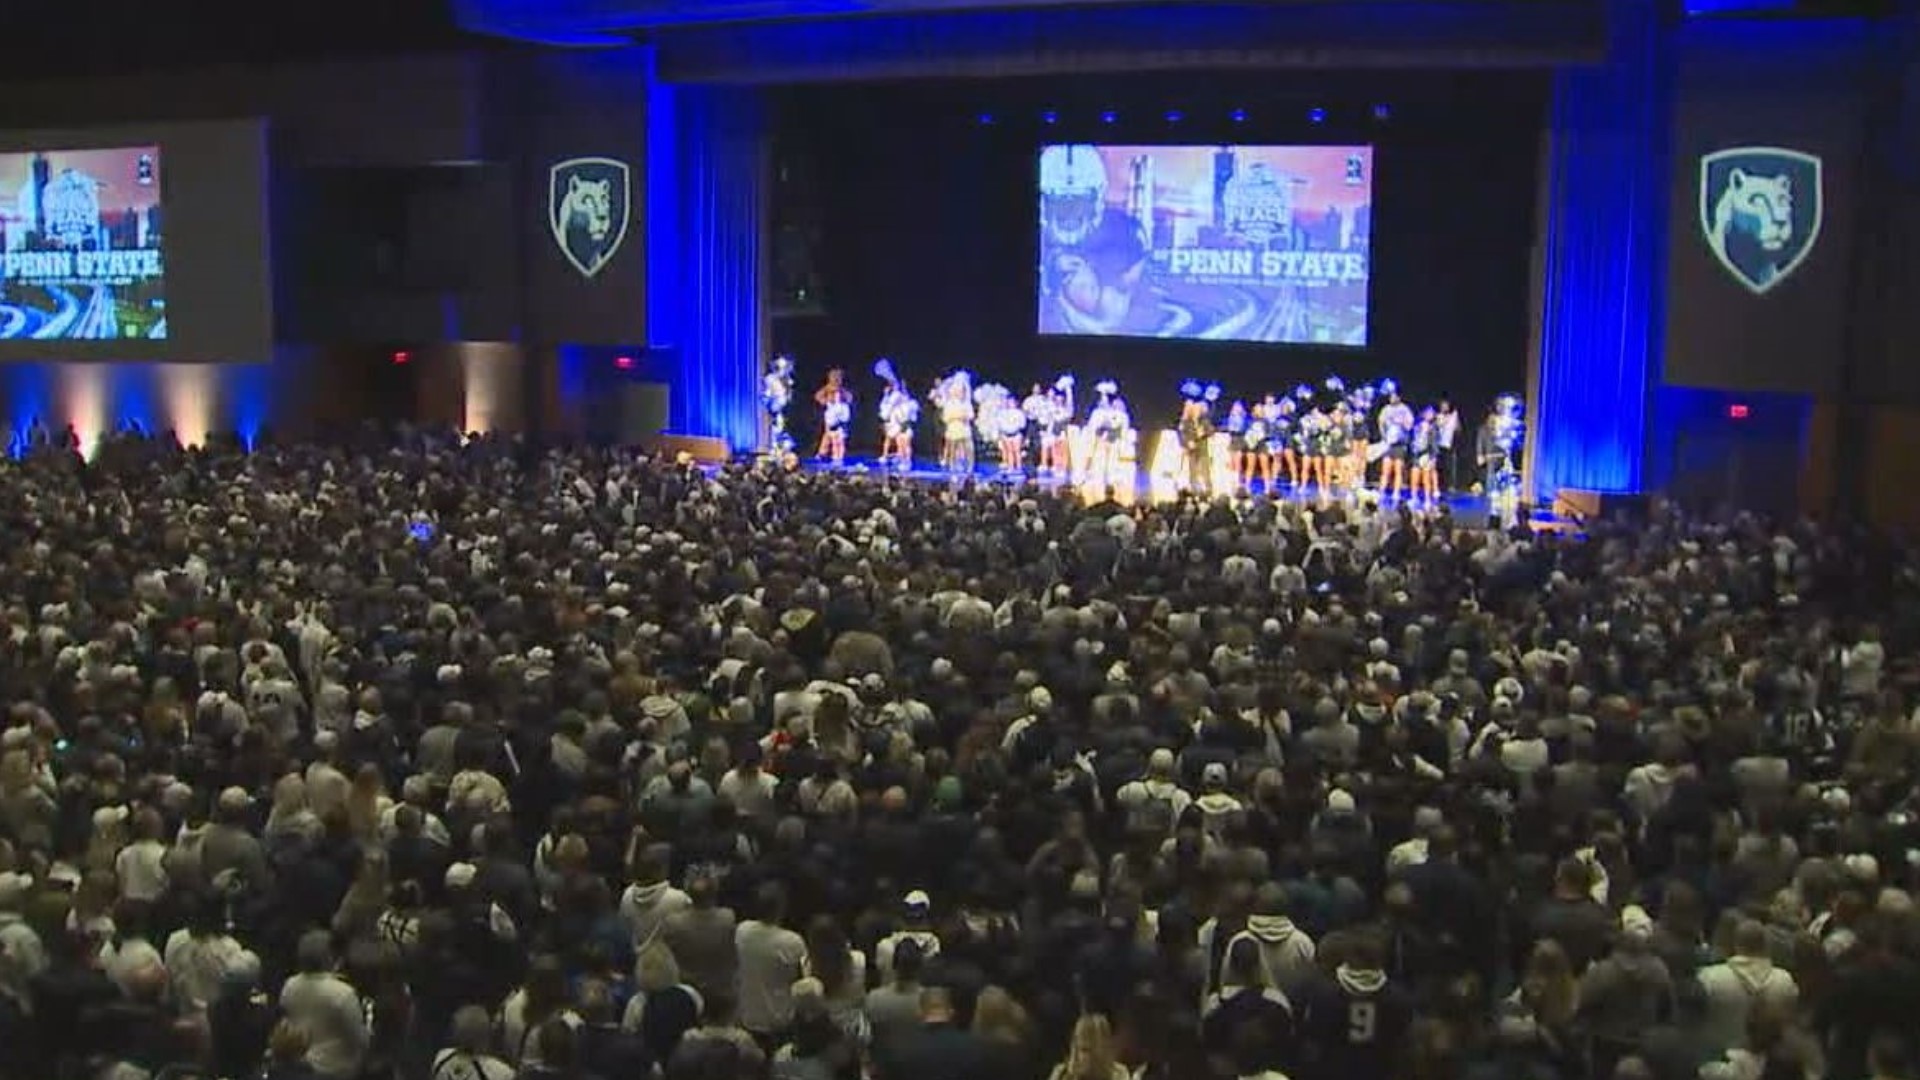 The crowd at the Penn State Alumni Association pep rally was over 3,000 strong, rocking the World Congress Center in downtown Atlanta.